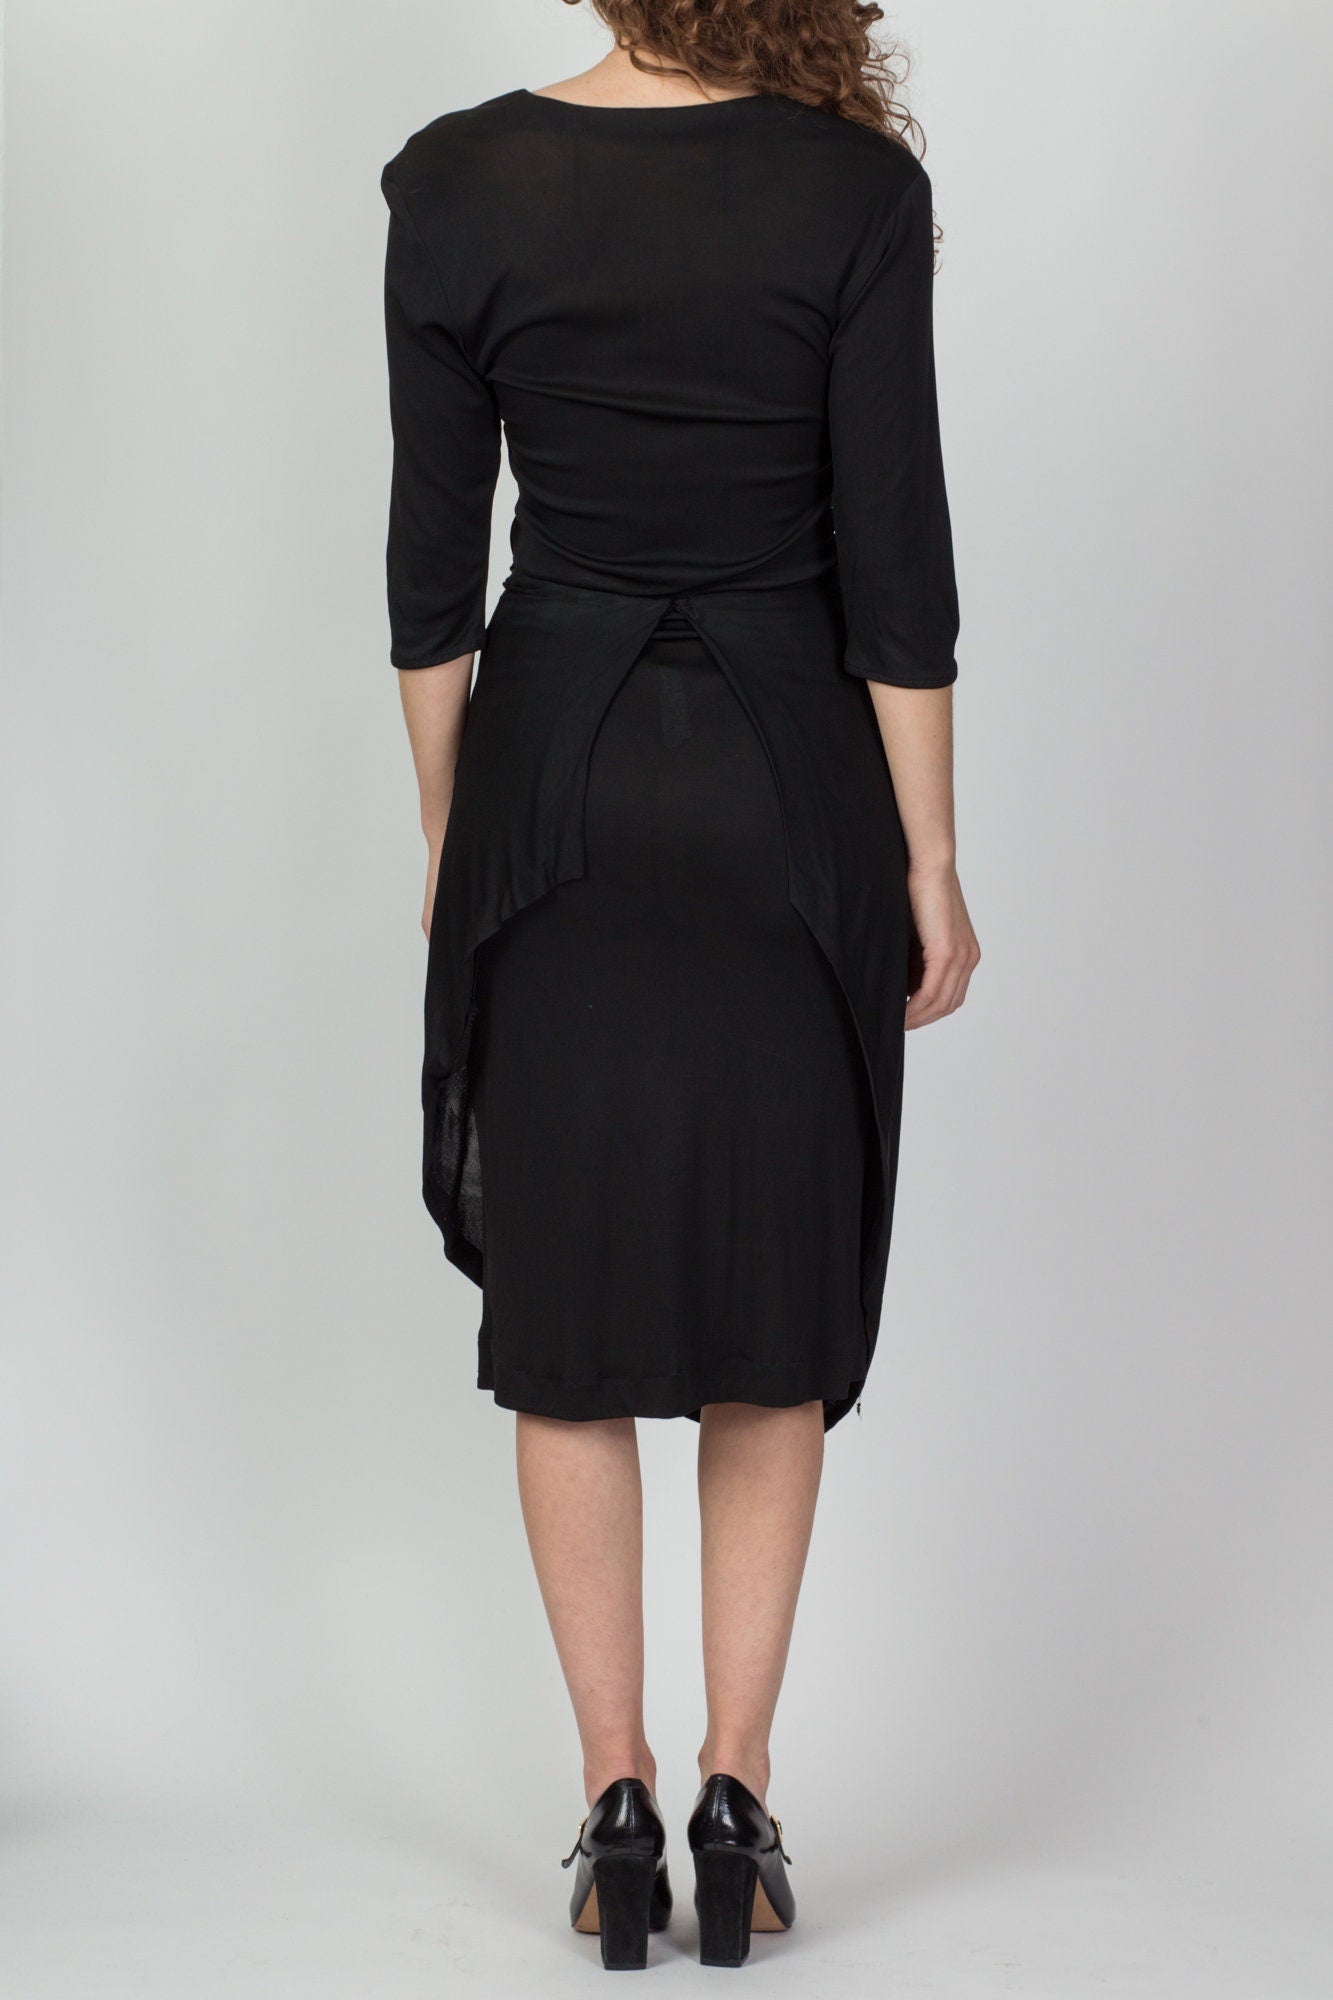 1940s Black Rayon Crepe Dress, As Is - Small 